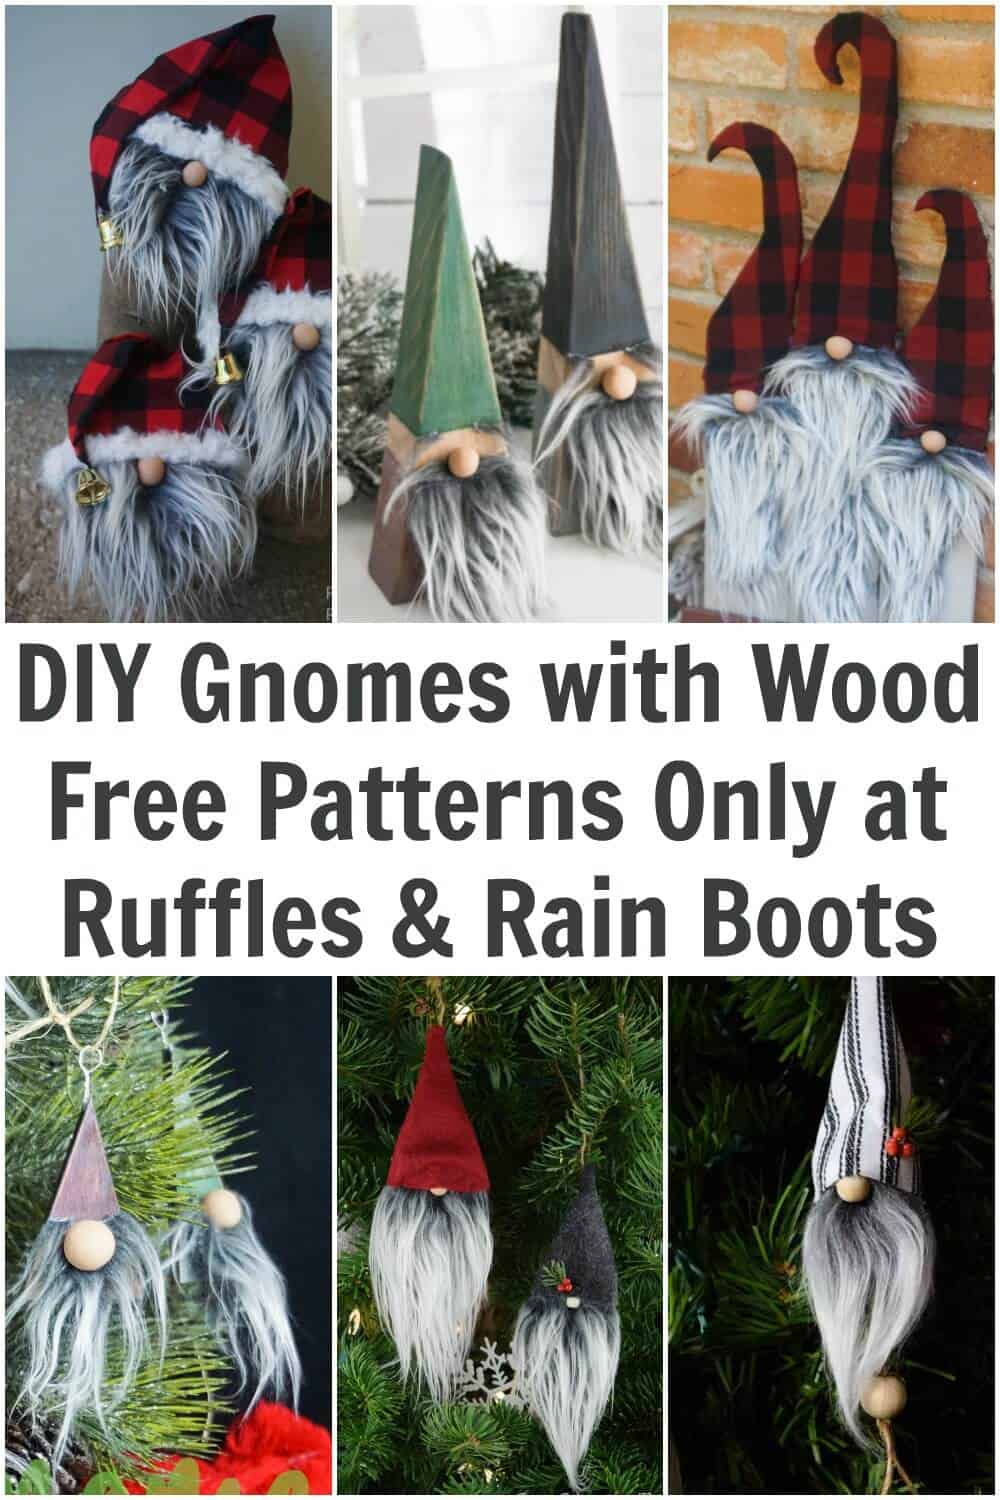 Six image collage of wood gnomes and ornaments with text which reads diy gnomes with wood free patterns.